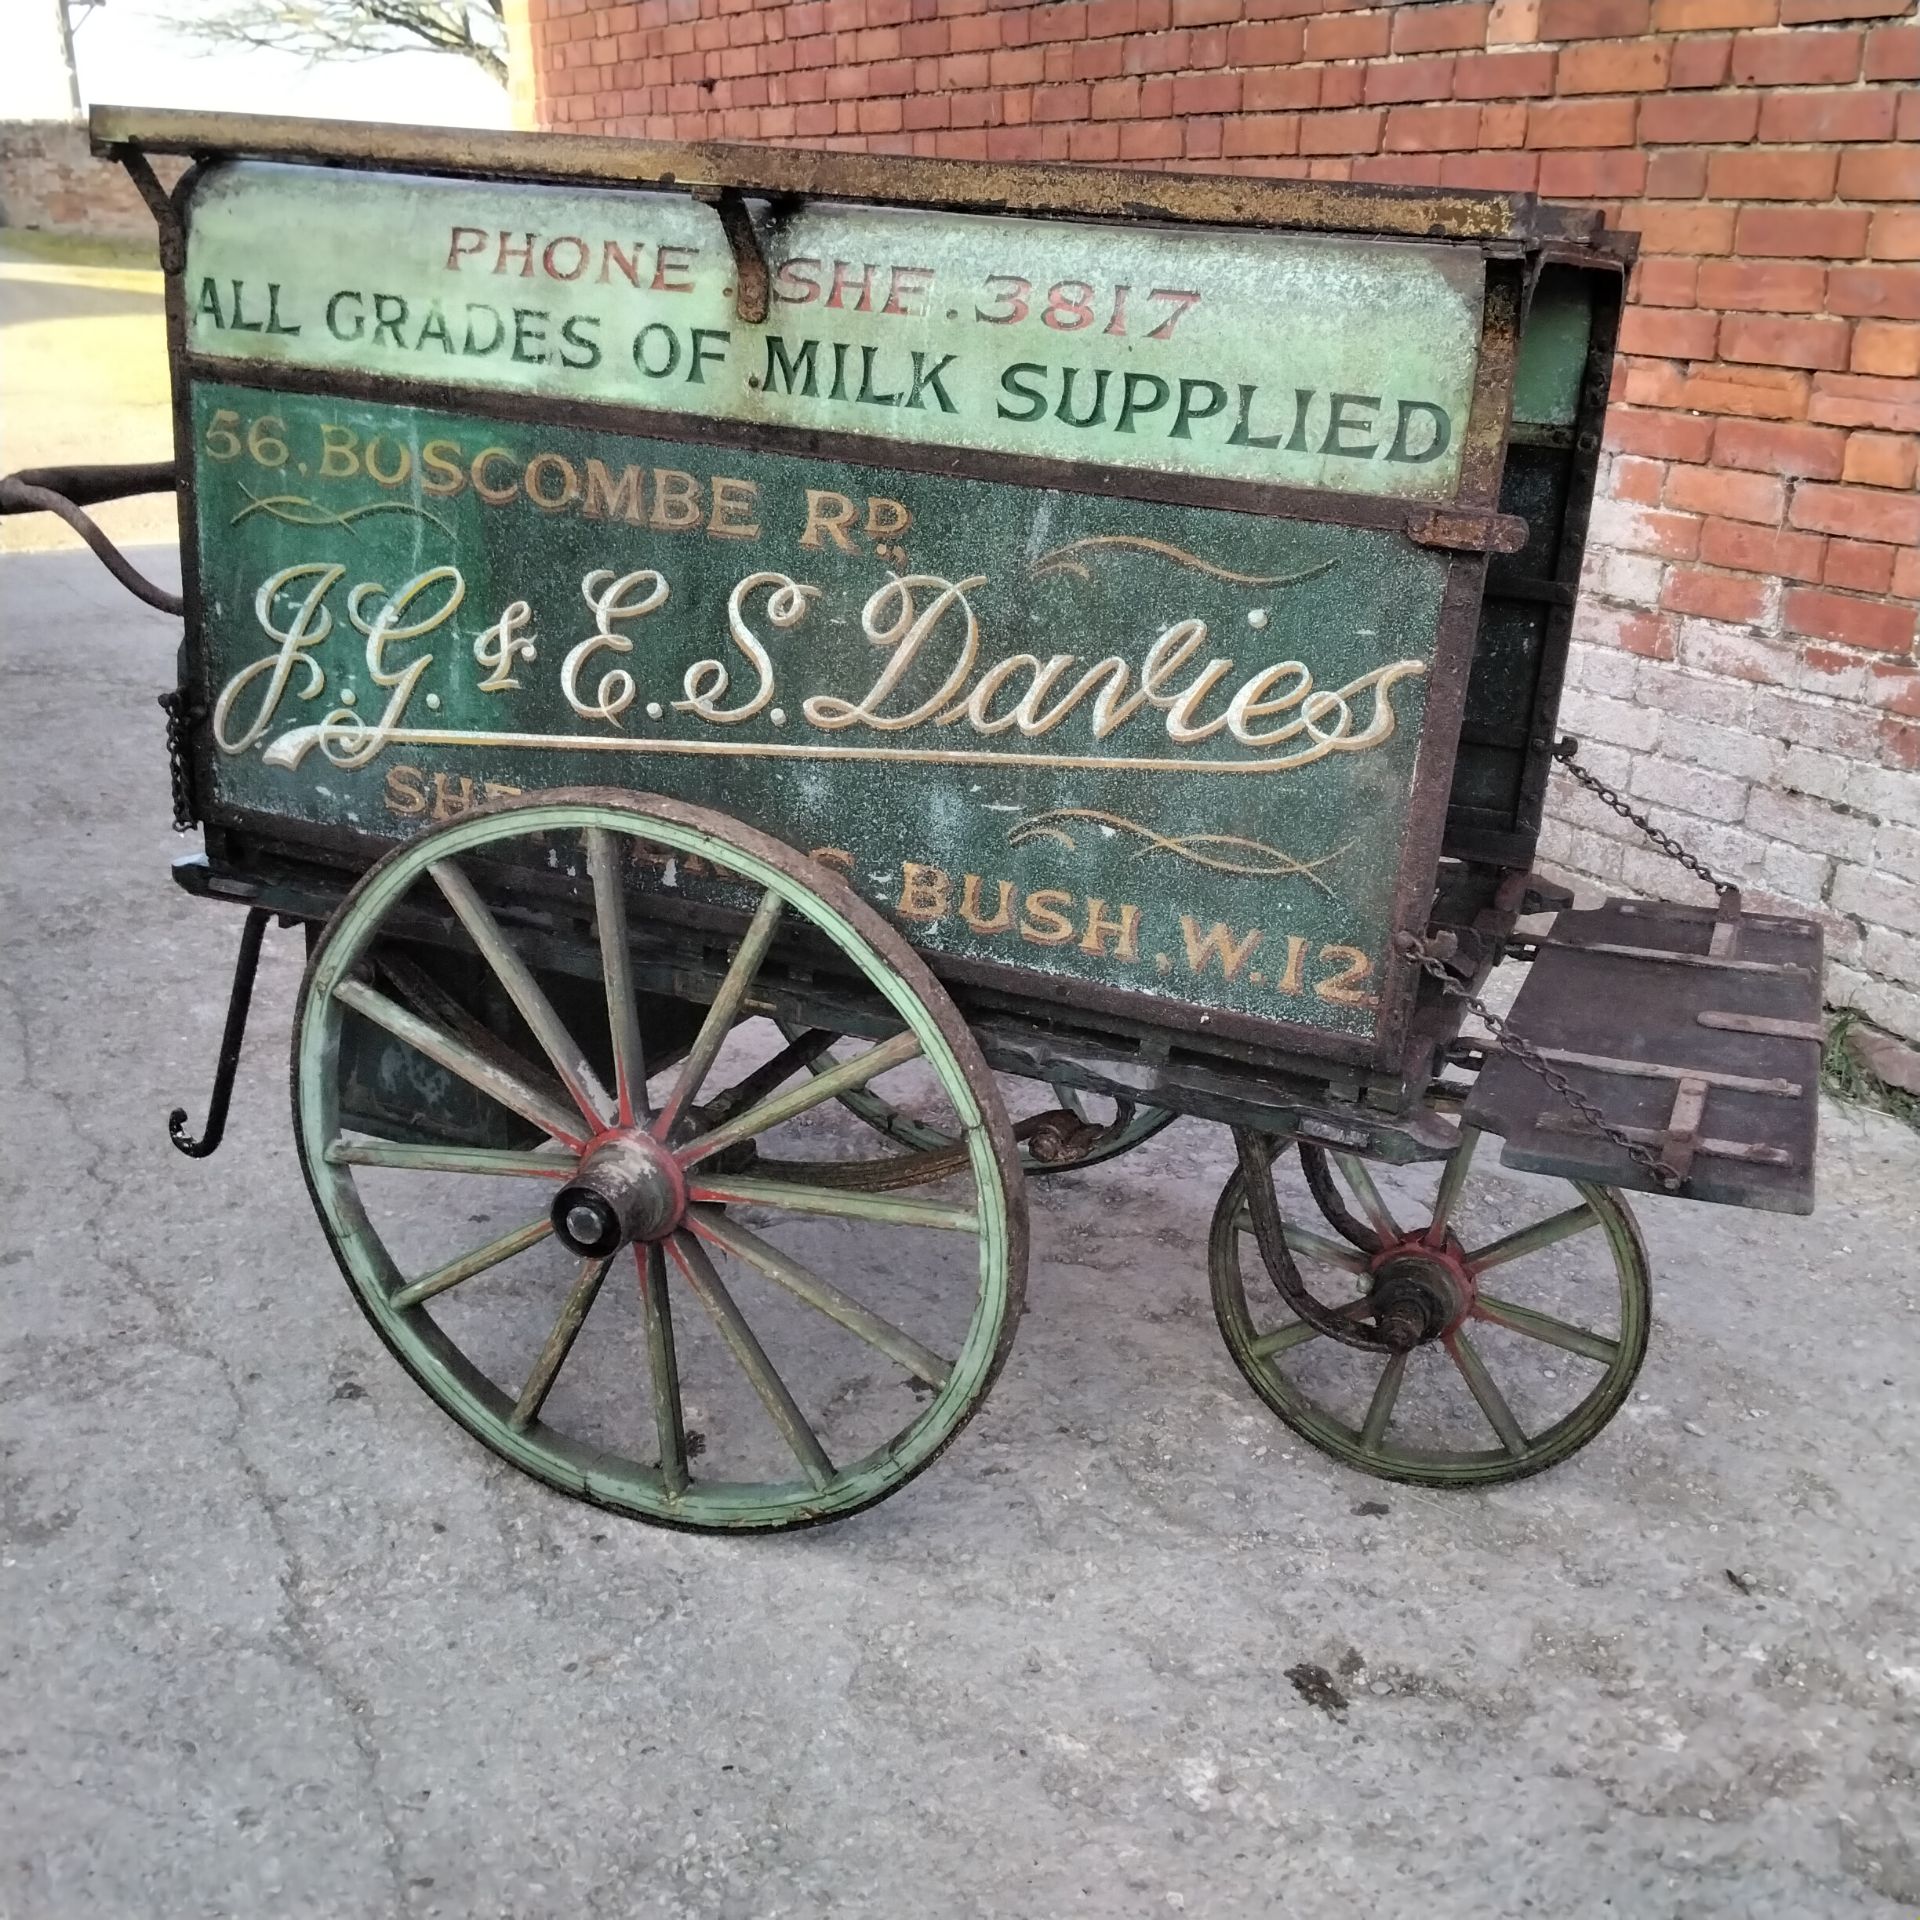 THREE WHEEL MILK DELIVERY HAND CART - Image 3 of 3